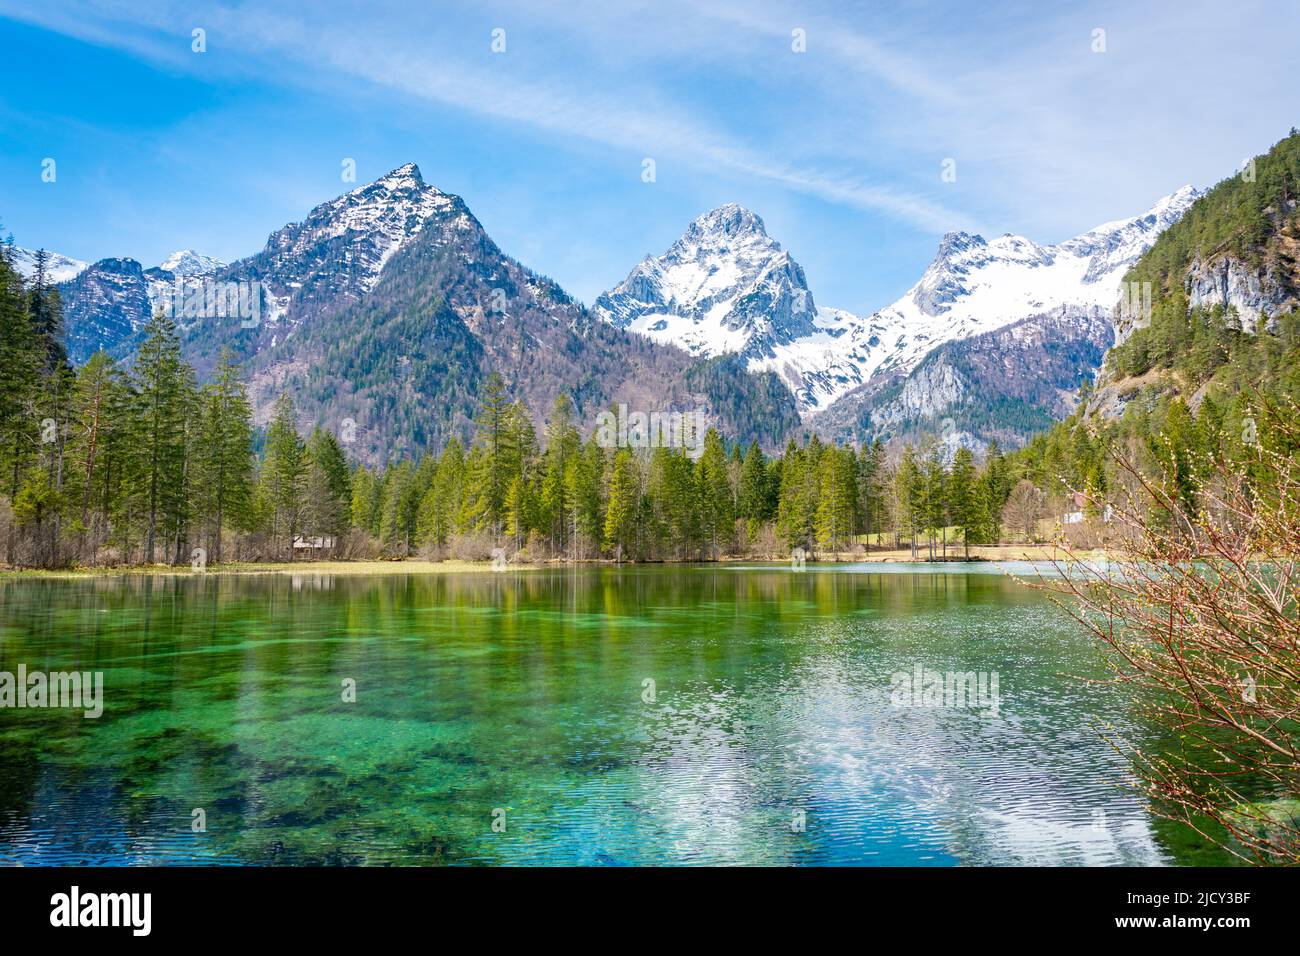 Schiederweiher lake with Ostrawitz, Spitzmauer and Großer Priel mountains in the background. Beautiful nature and scenery in Austria, Europe. Stock Photo